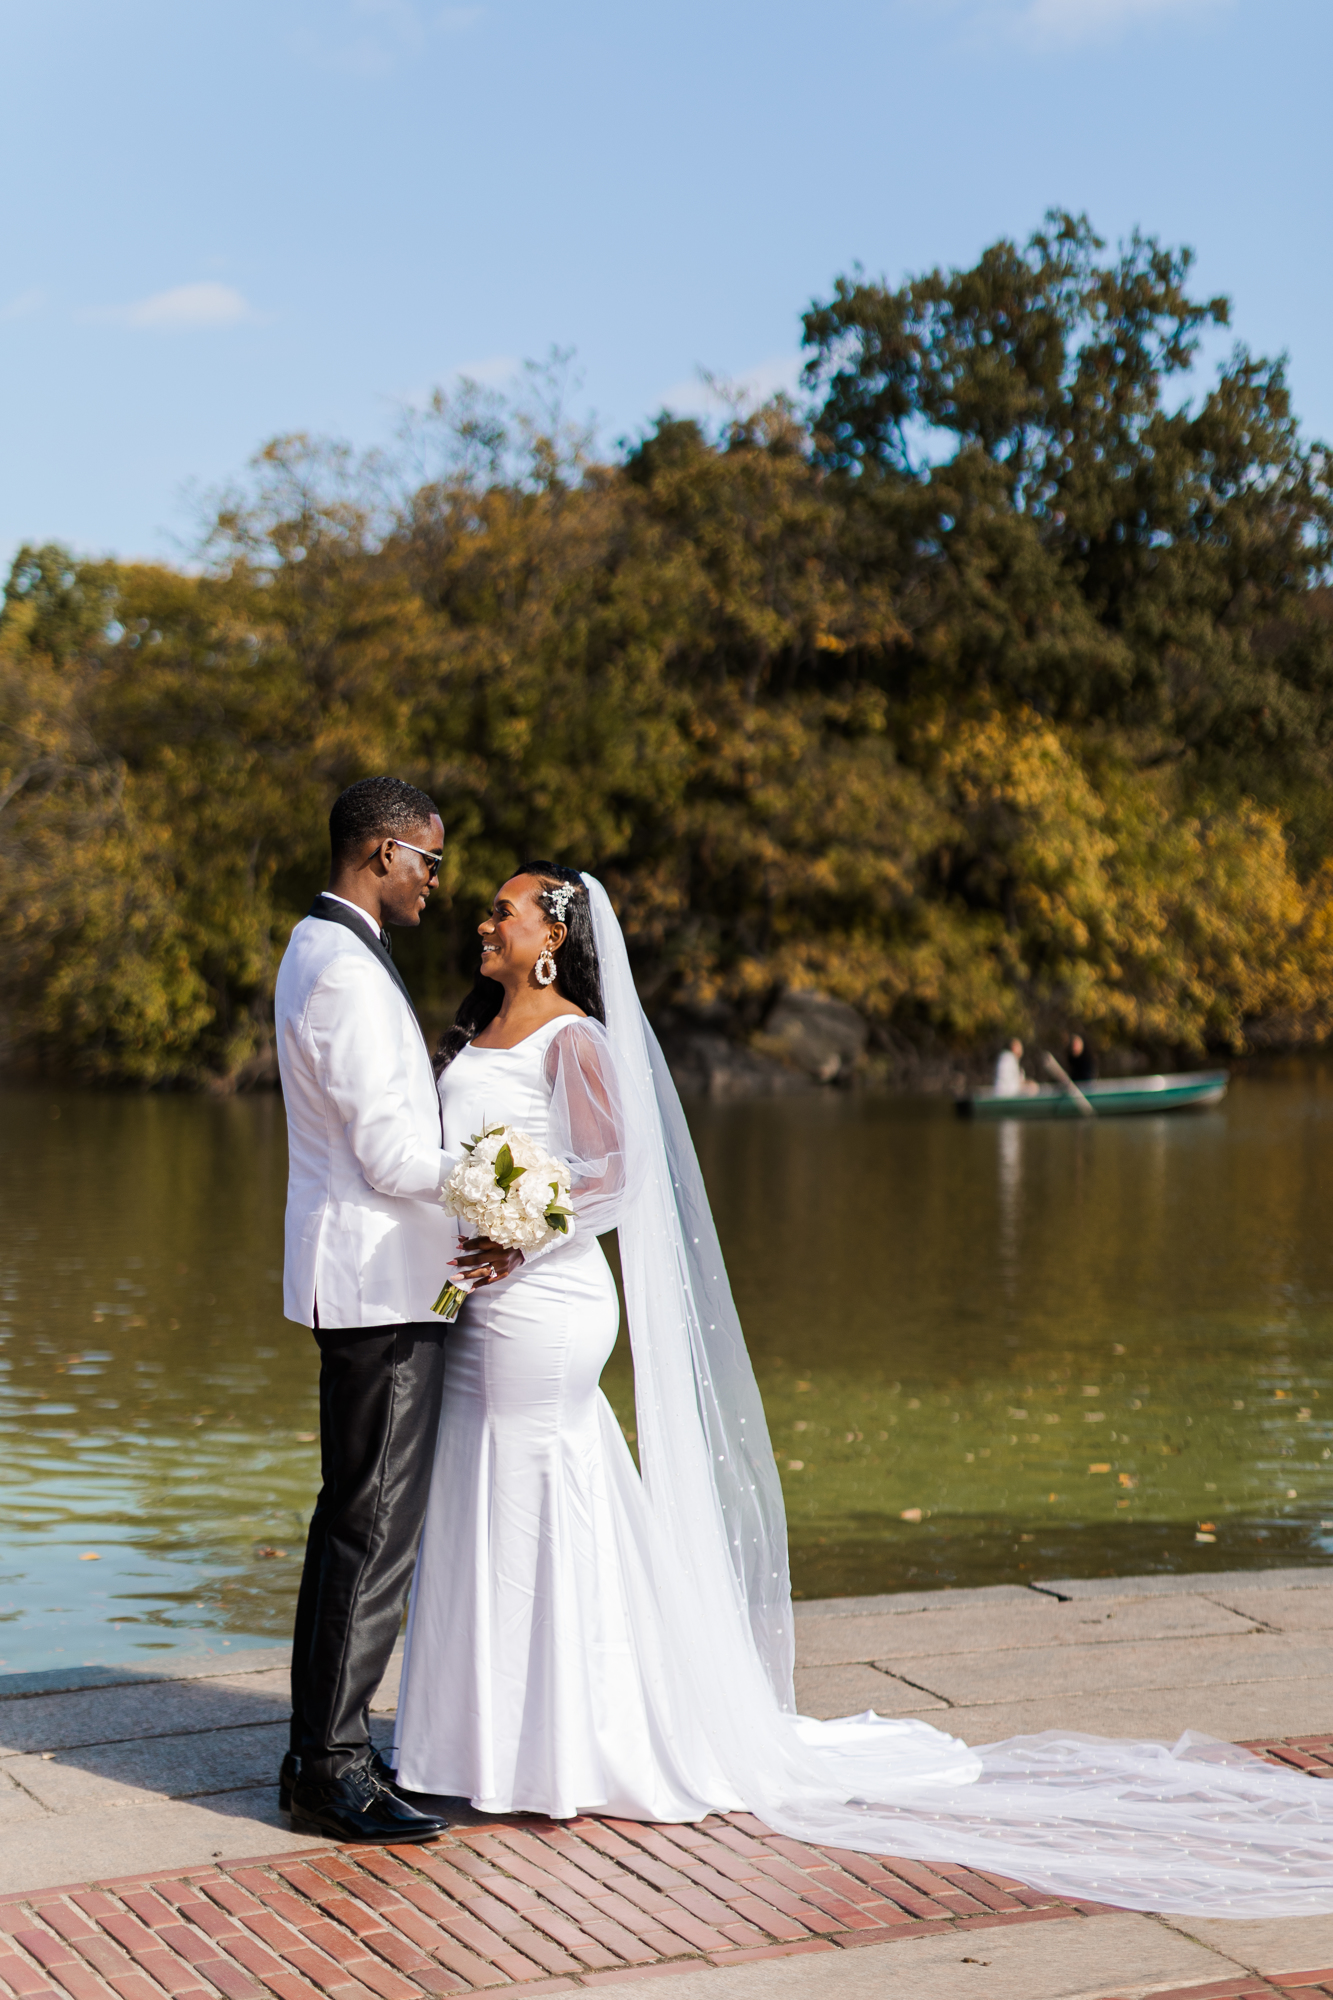 Fantastic Central Park Wedding Photos on Cherry Hill in Fall